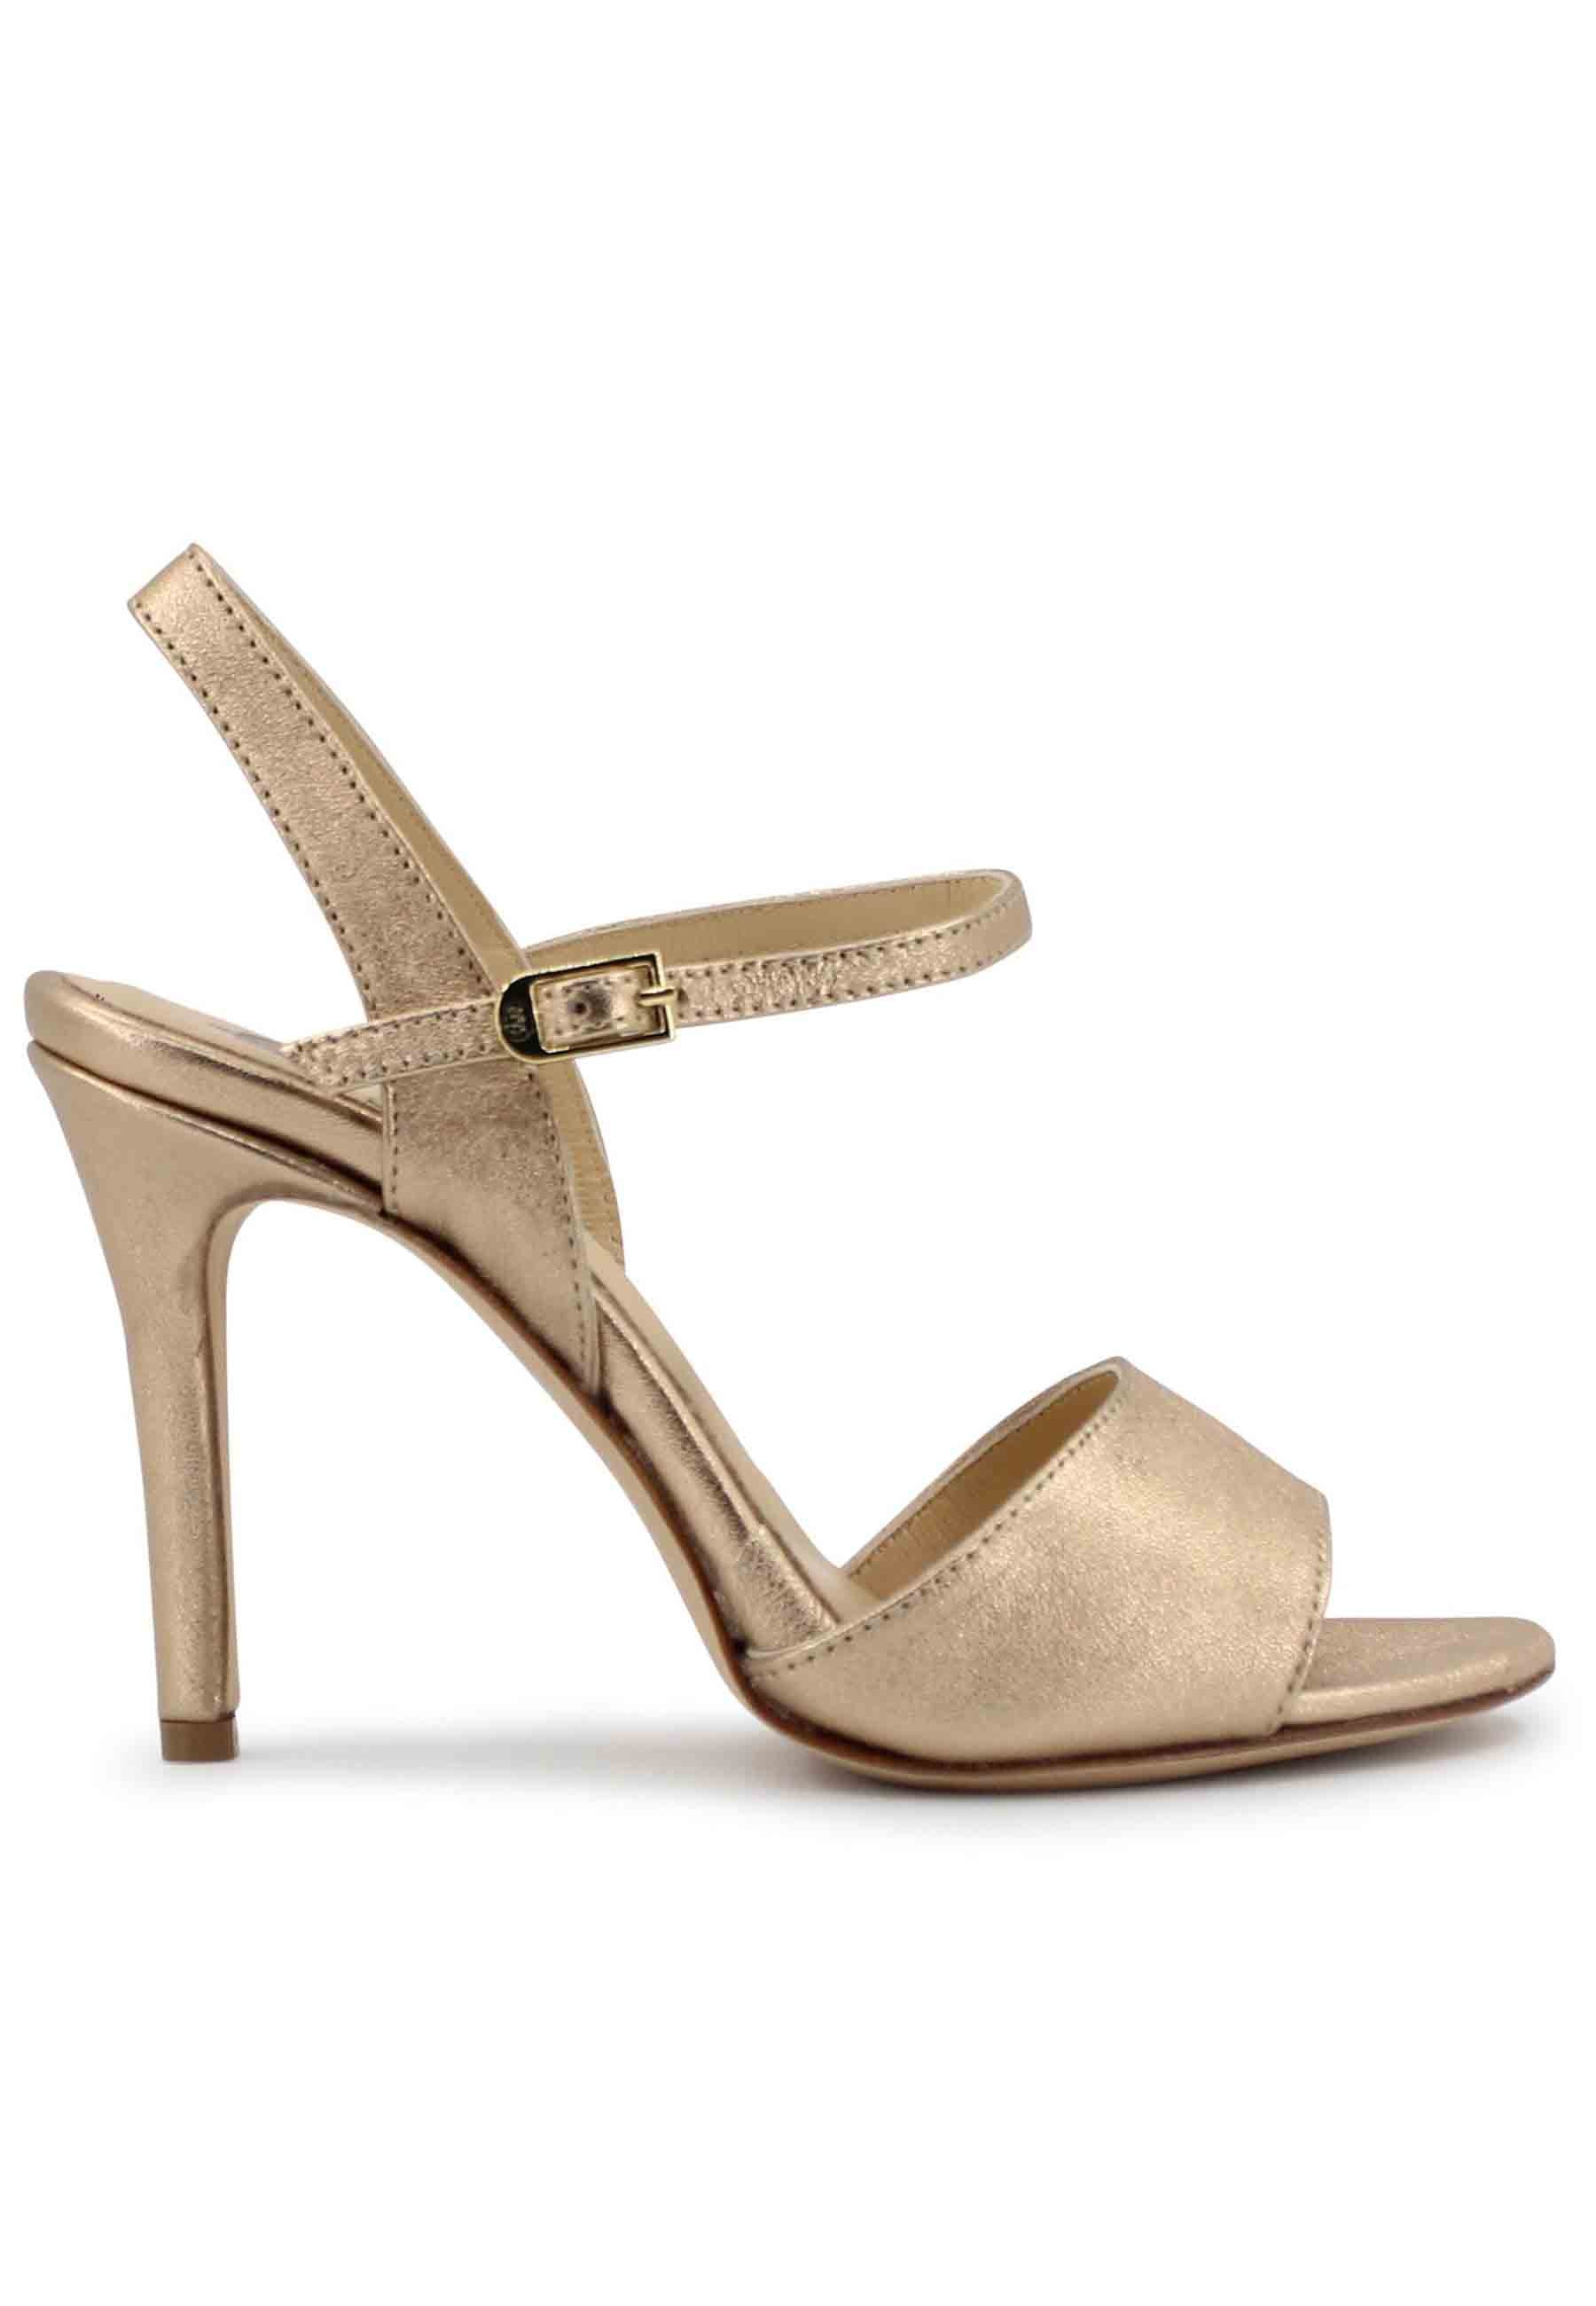 Women's sandals in nude laminated leather with high heel and ankle strap